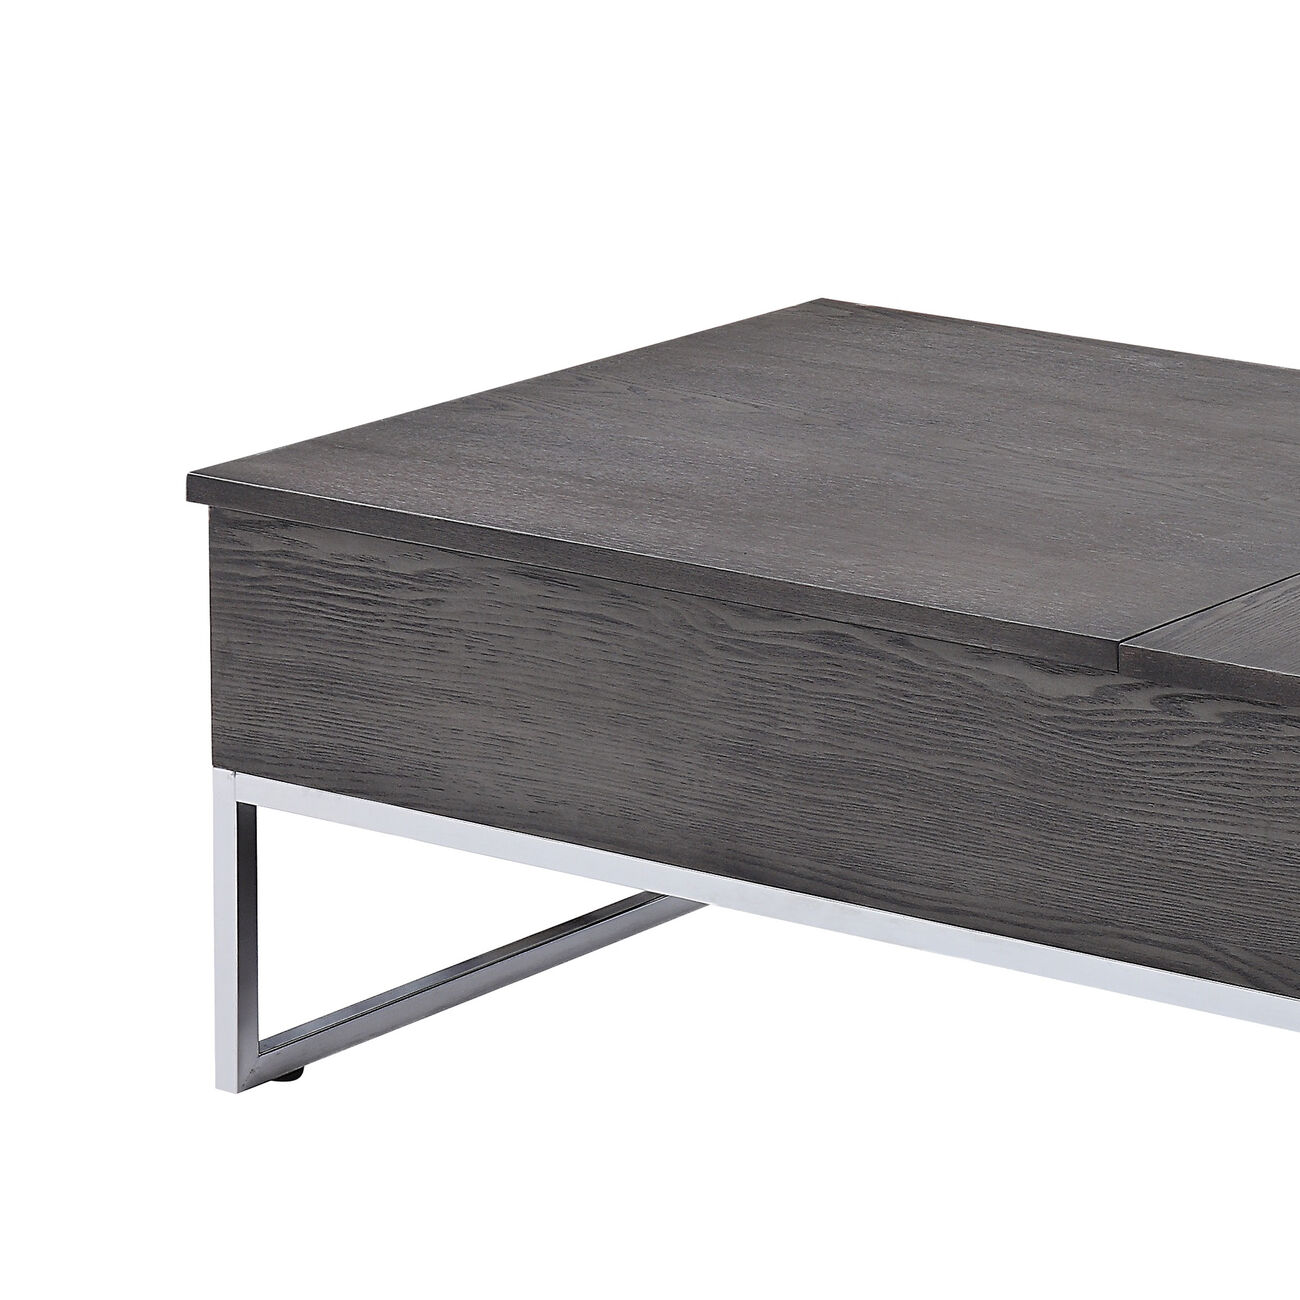 Wooden Coffee Table with Two Lift Tops and Metal Sled Leg Support, Gray and Silver